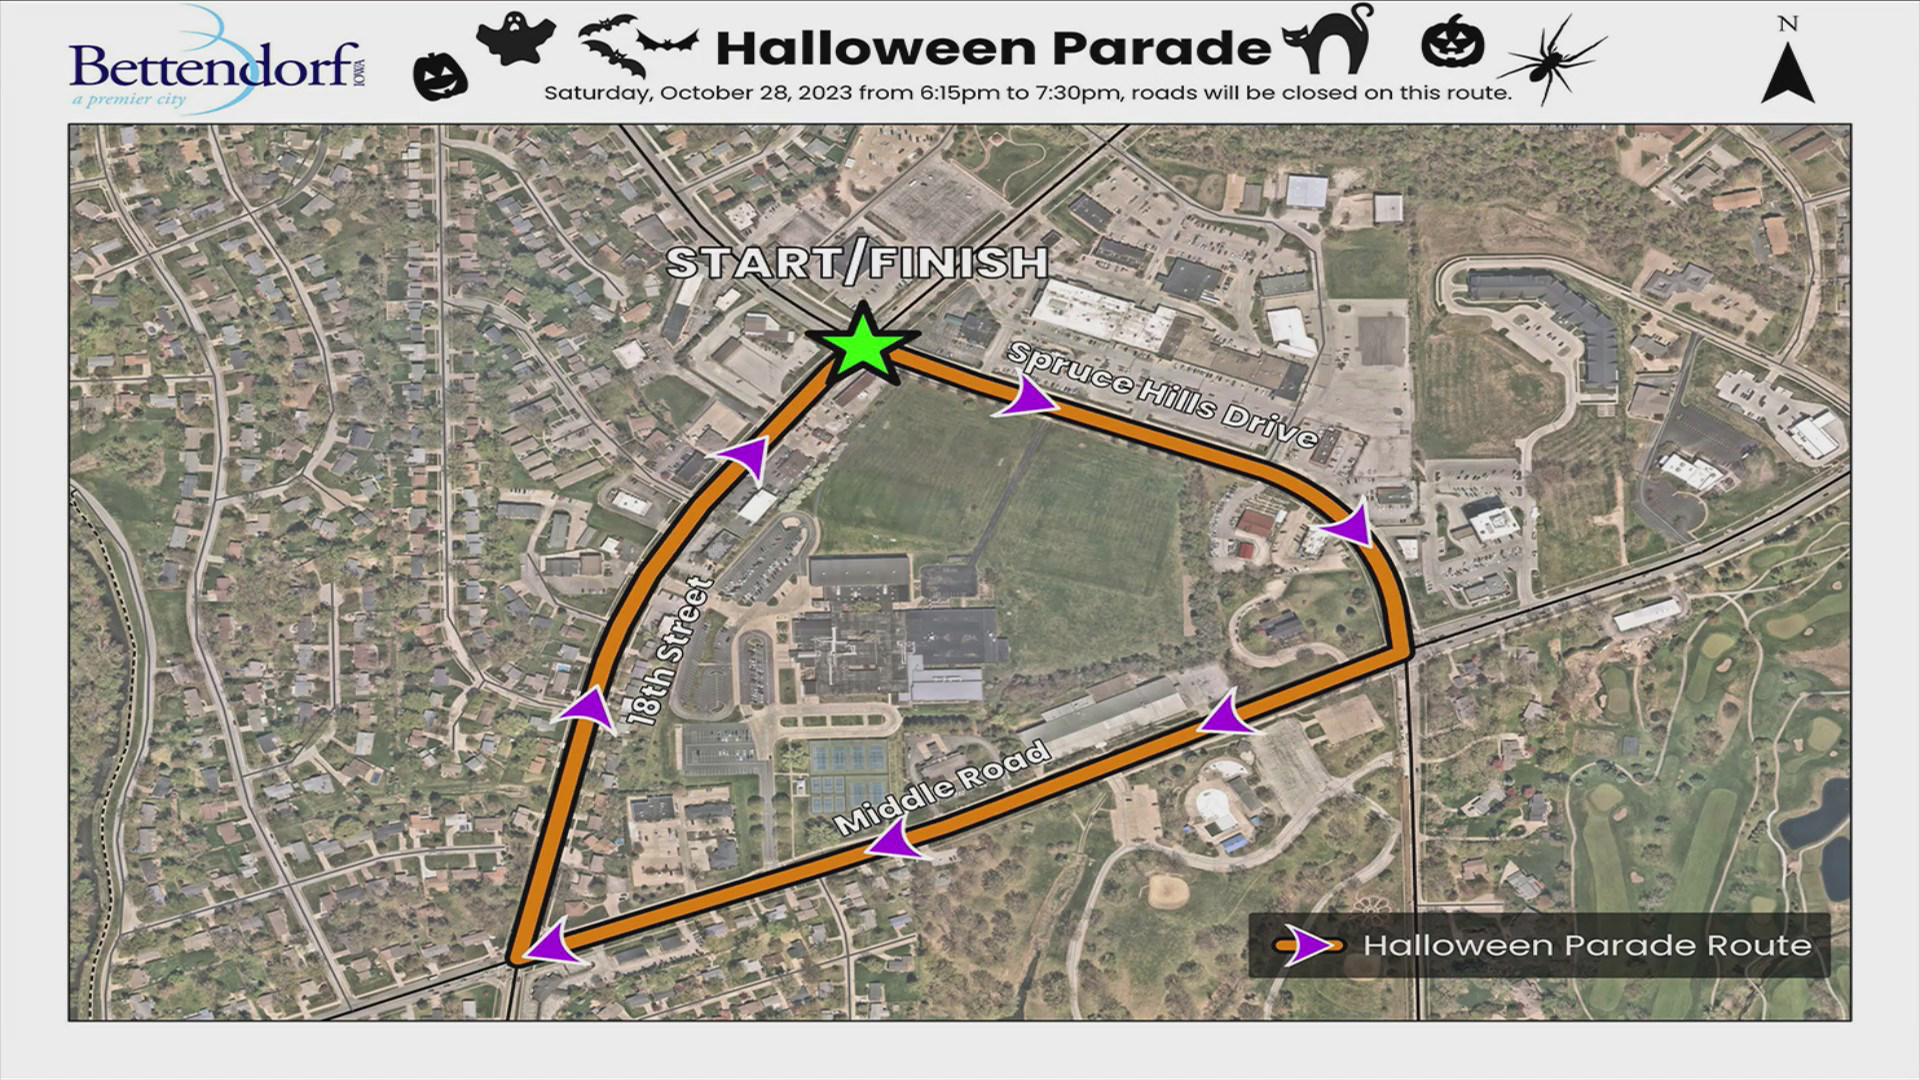 Bettendorf Halloween Parade route